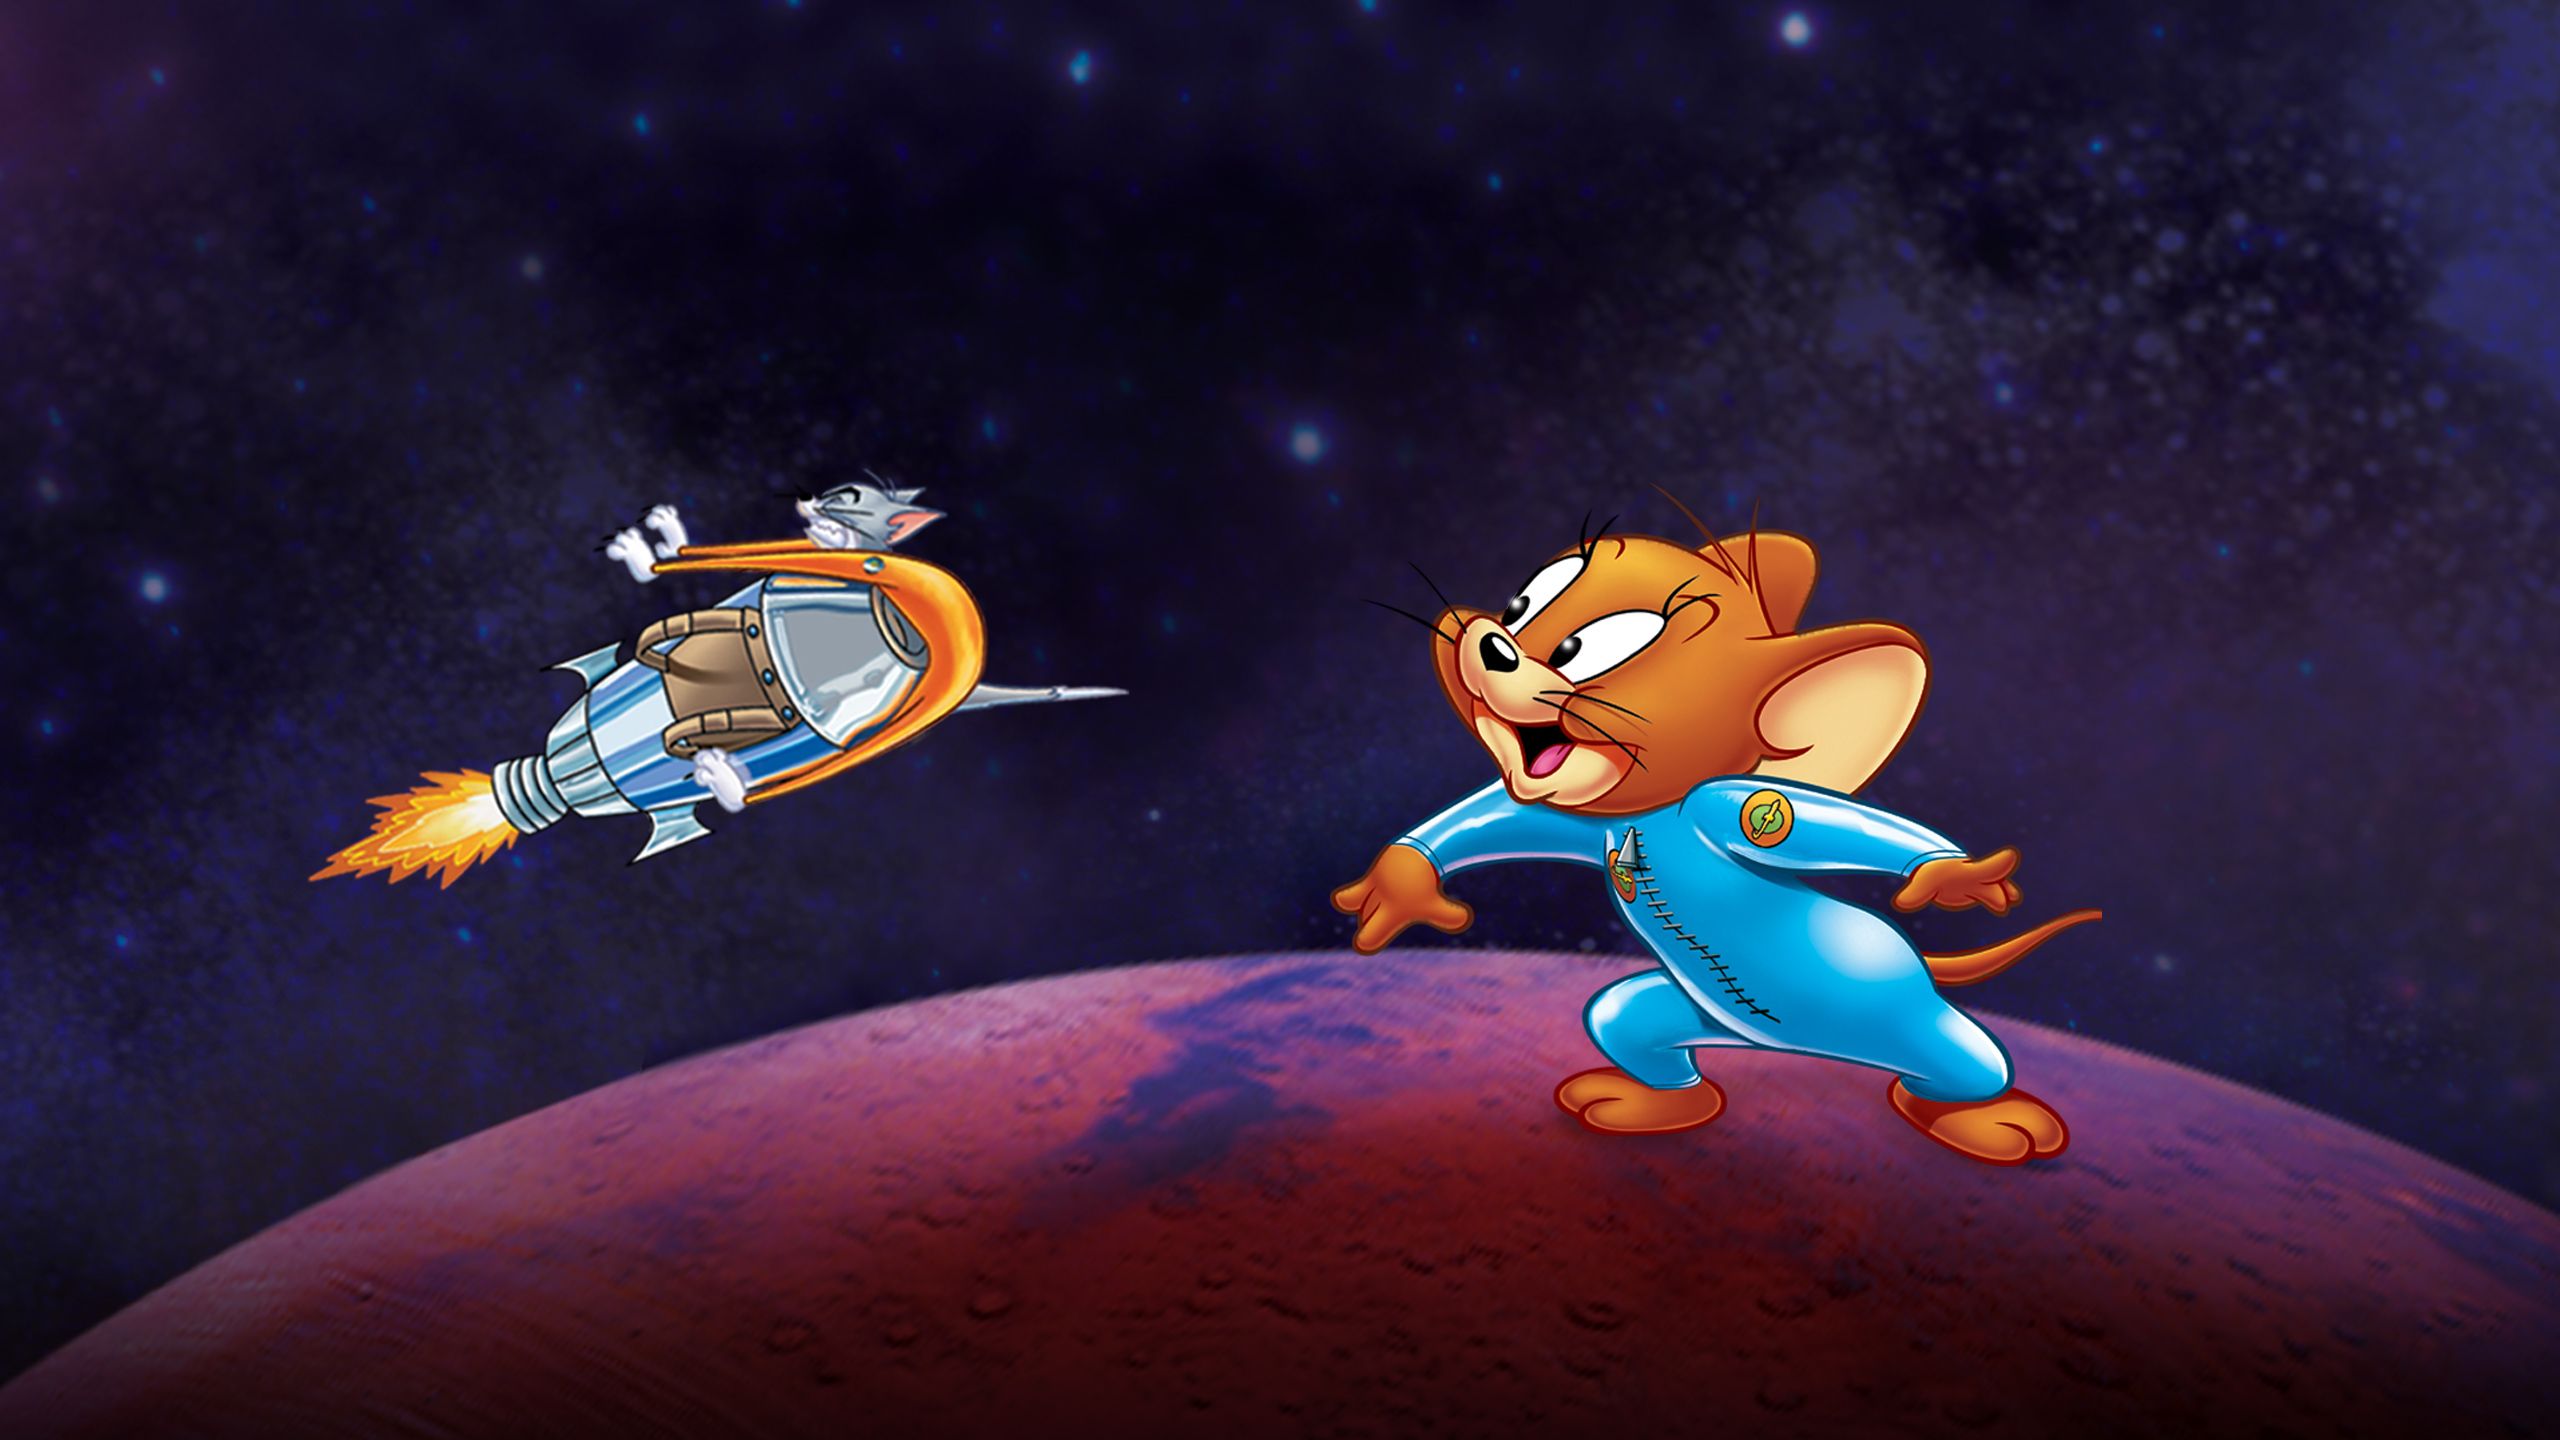 the fast and the furry blast off to mars the movie